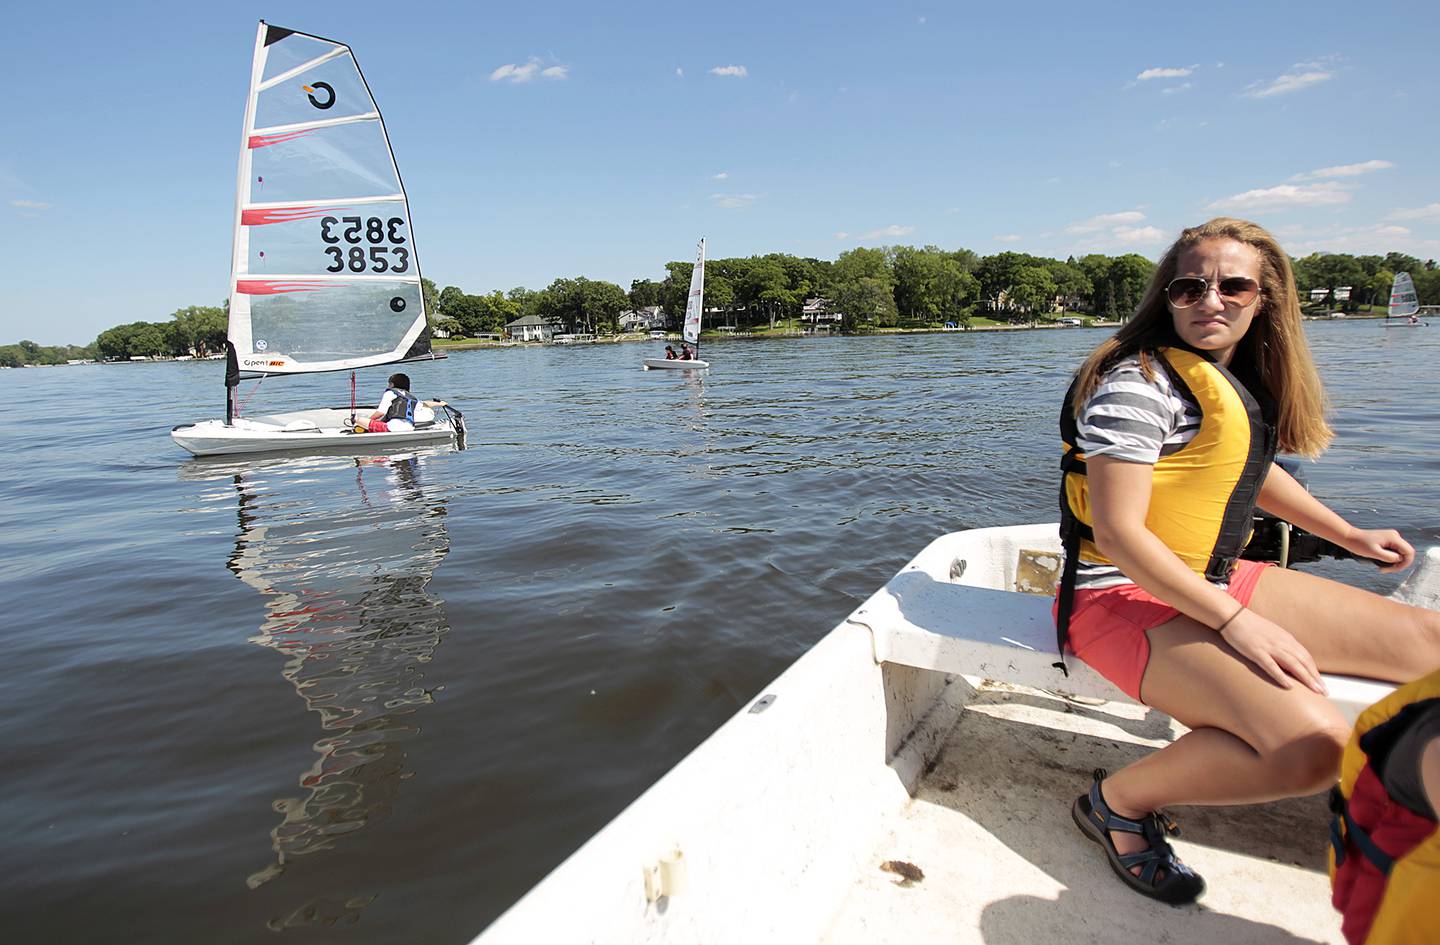 Sailing instructor Cortney Kingsley, 17, of McHenry watches as students operate sailboats on Pistakee Lake. Kyle Grillot - kgrillot@shawmedia.com